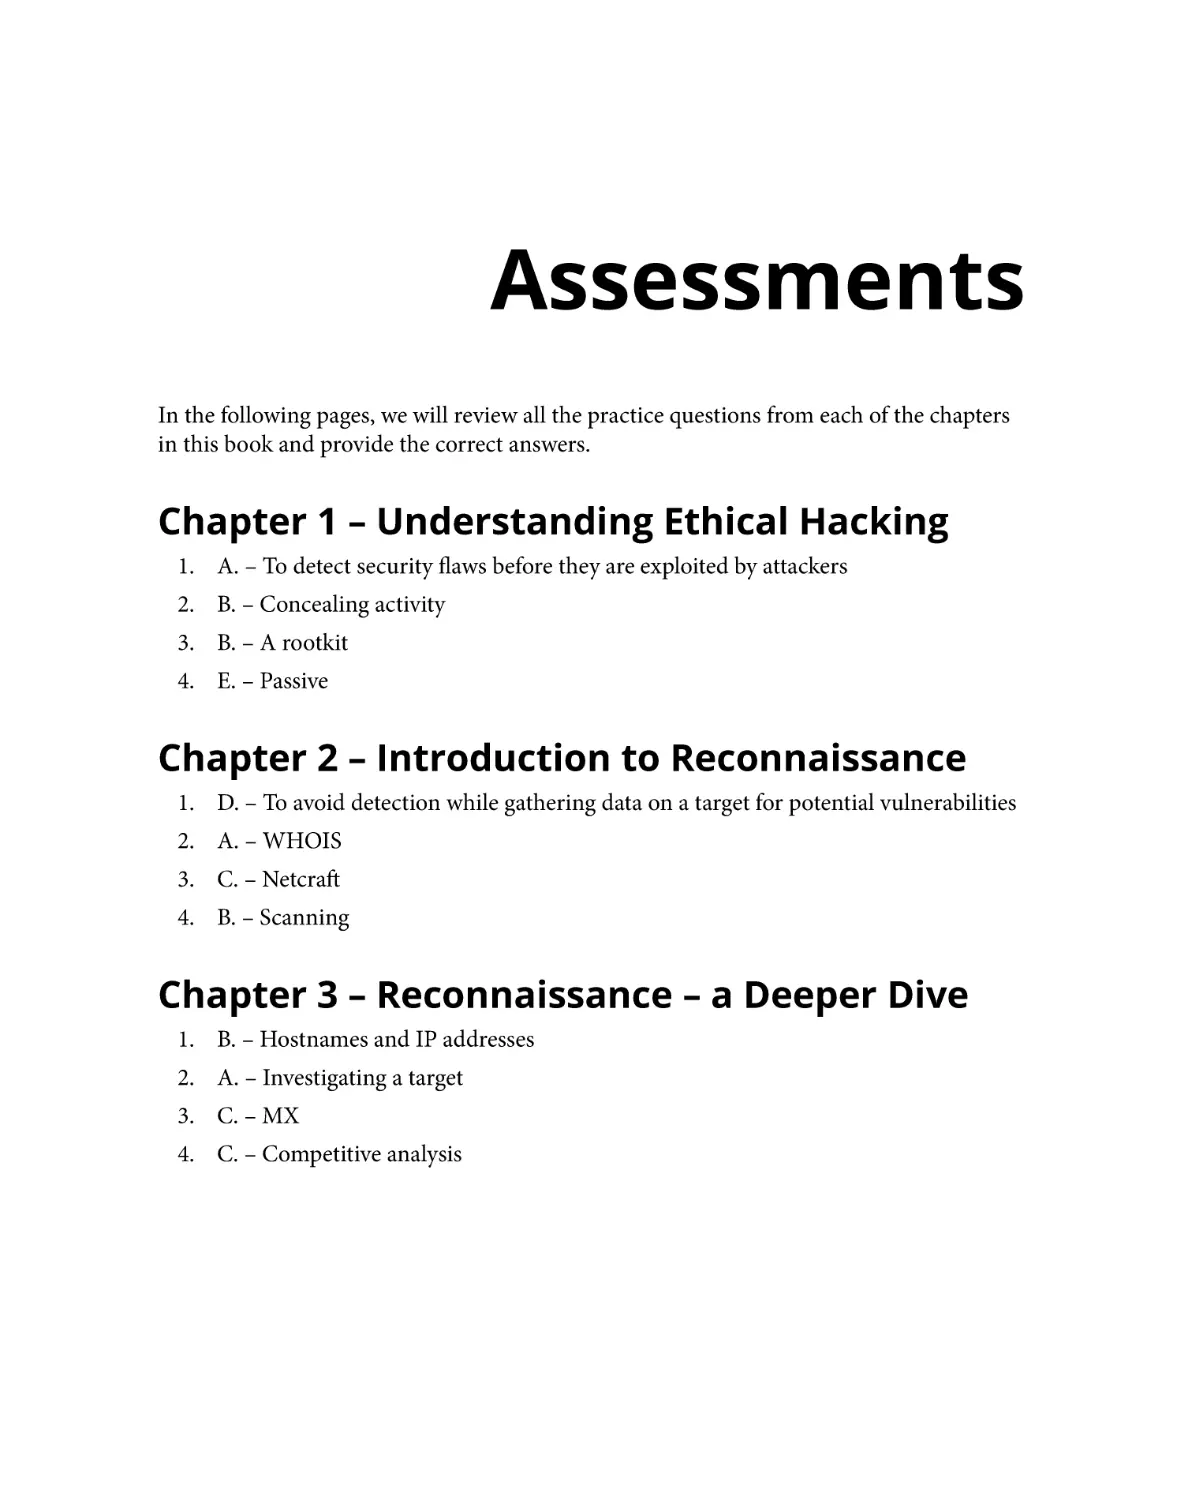 Assessments
Chapter 1 – Understanding Ethical Hacking
Chapter 2 – Introduction to Reconnaissance
Chapter 3 – Reconnaissance – a Deeper Dive